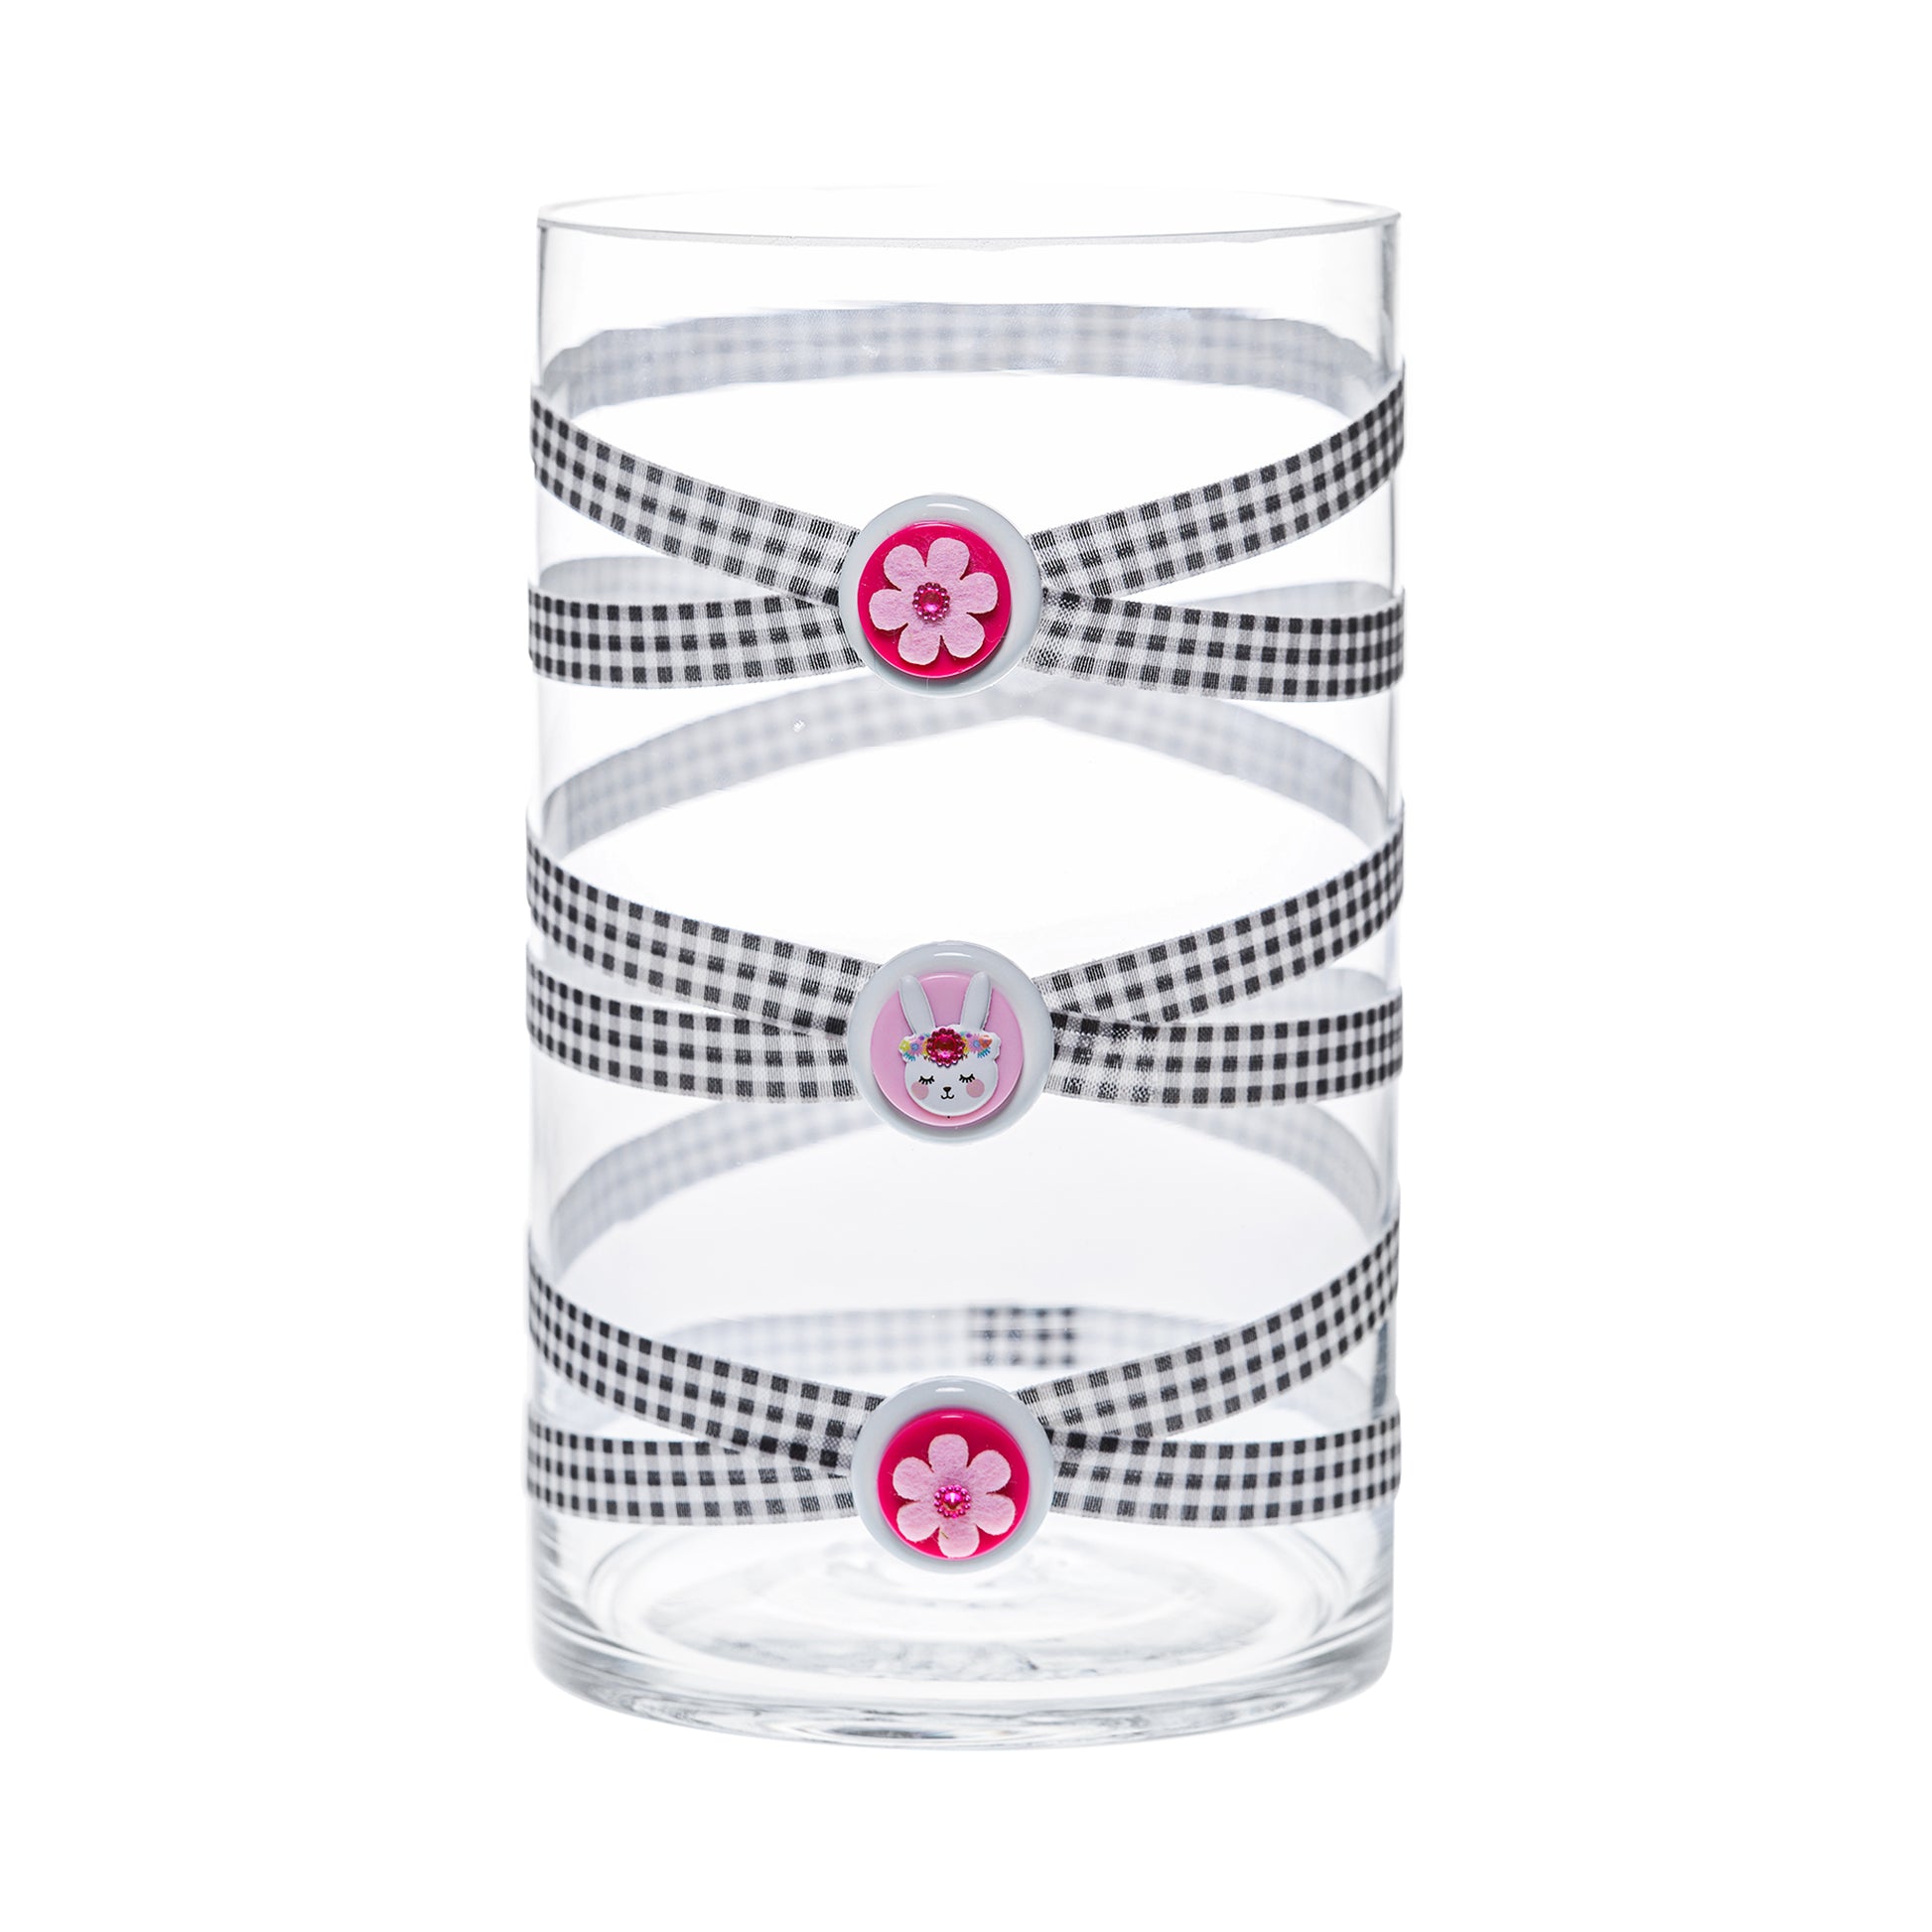 Front of Glass Wrappings 10" cylinder vase wrapped in black & white check elastic, decorated with 2 pink flowers and jeweled bunny.